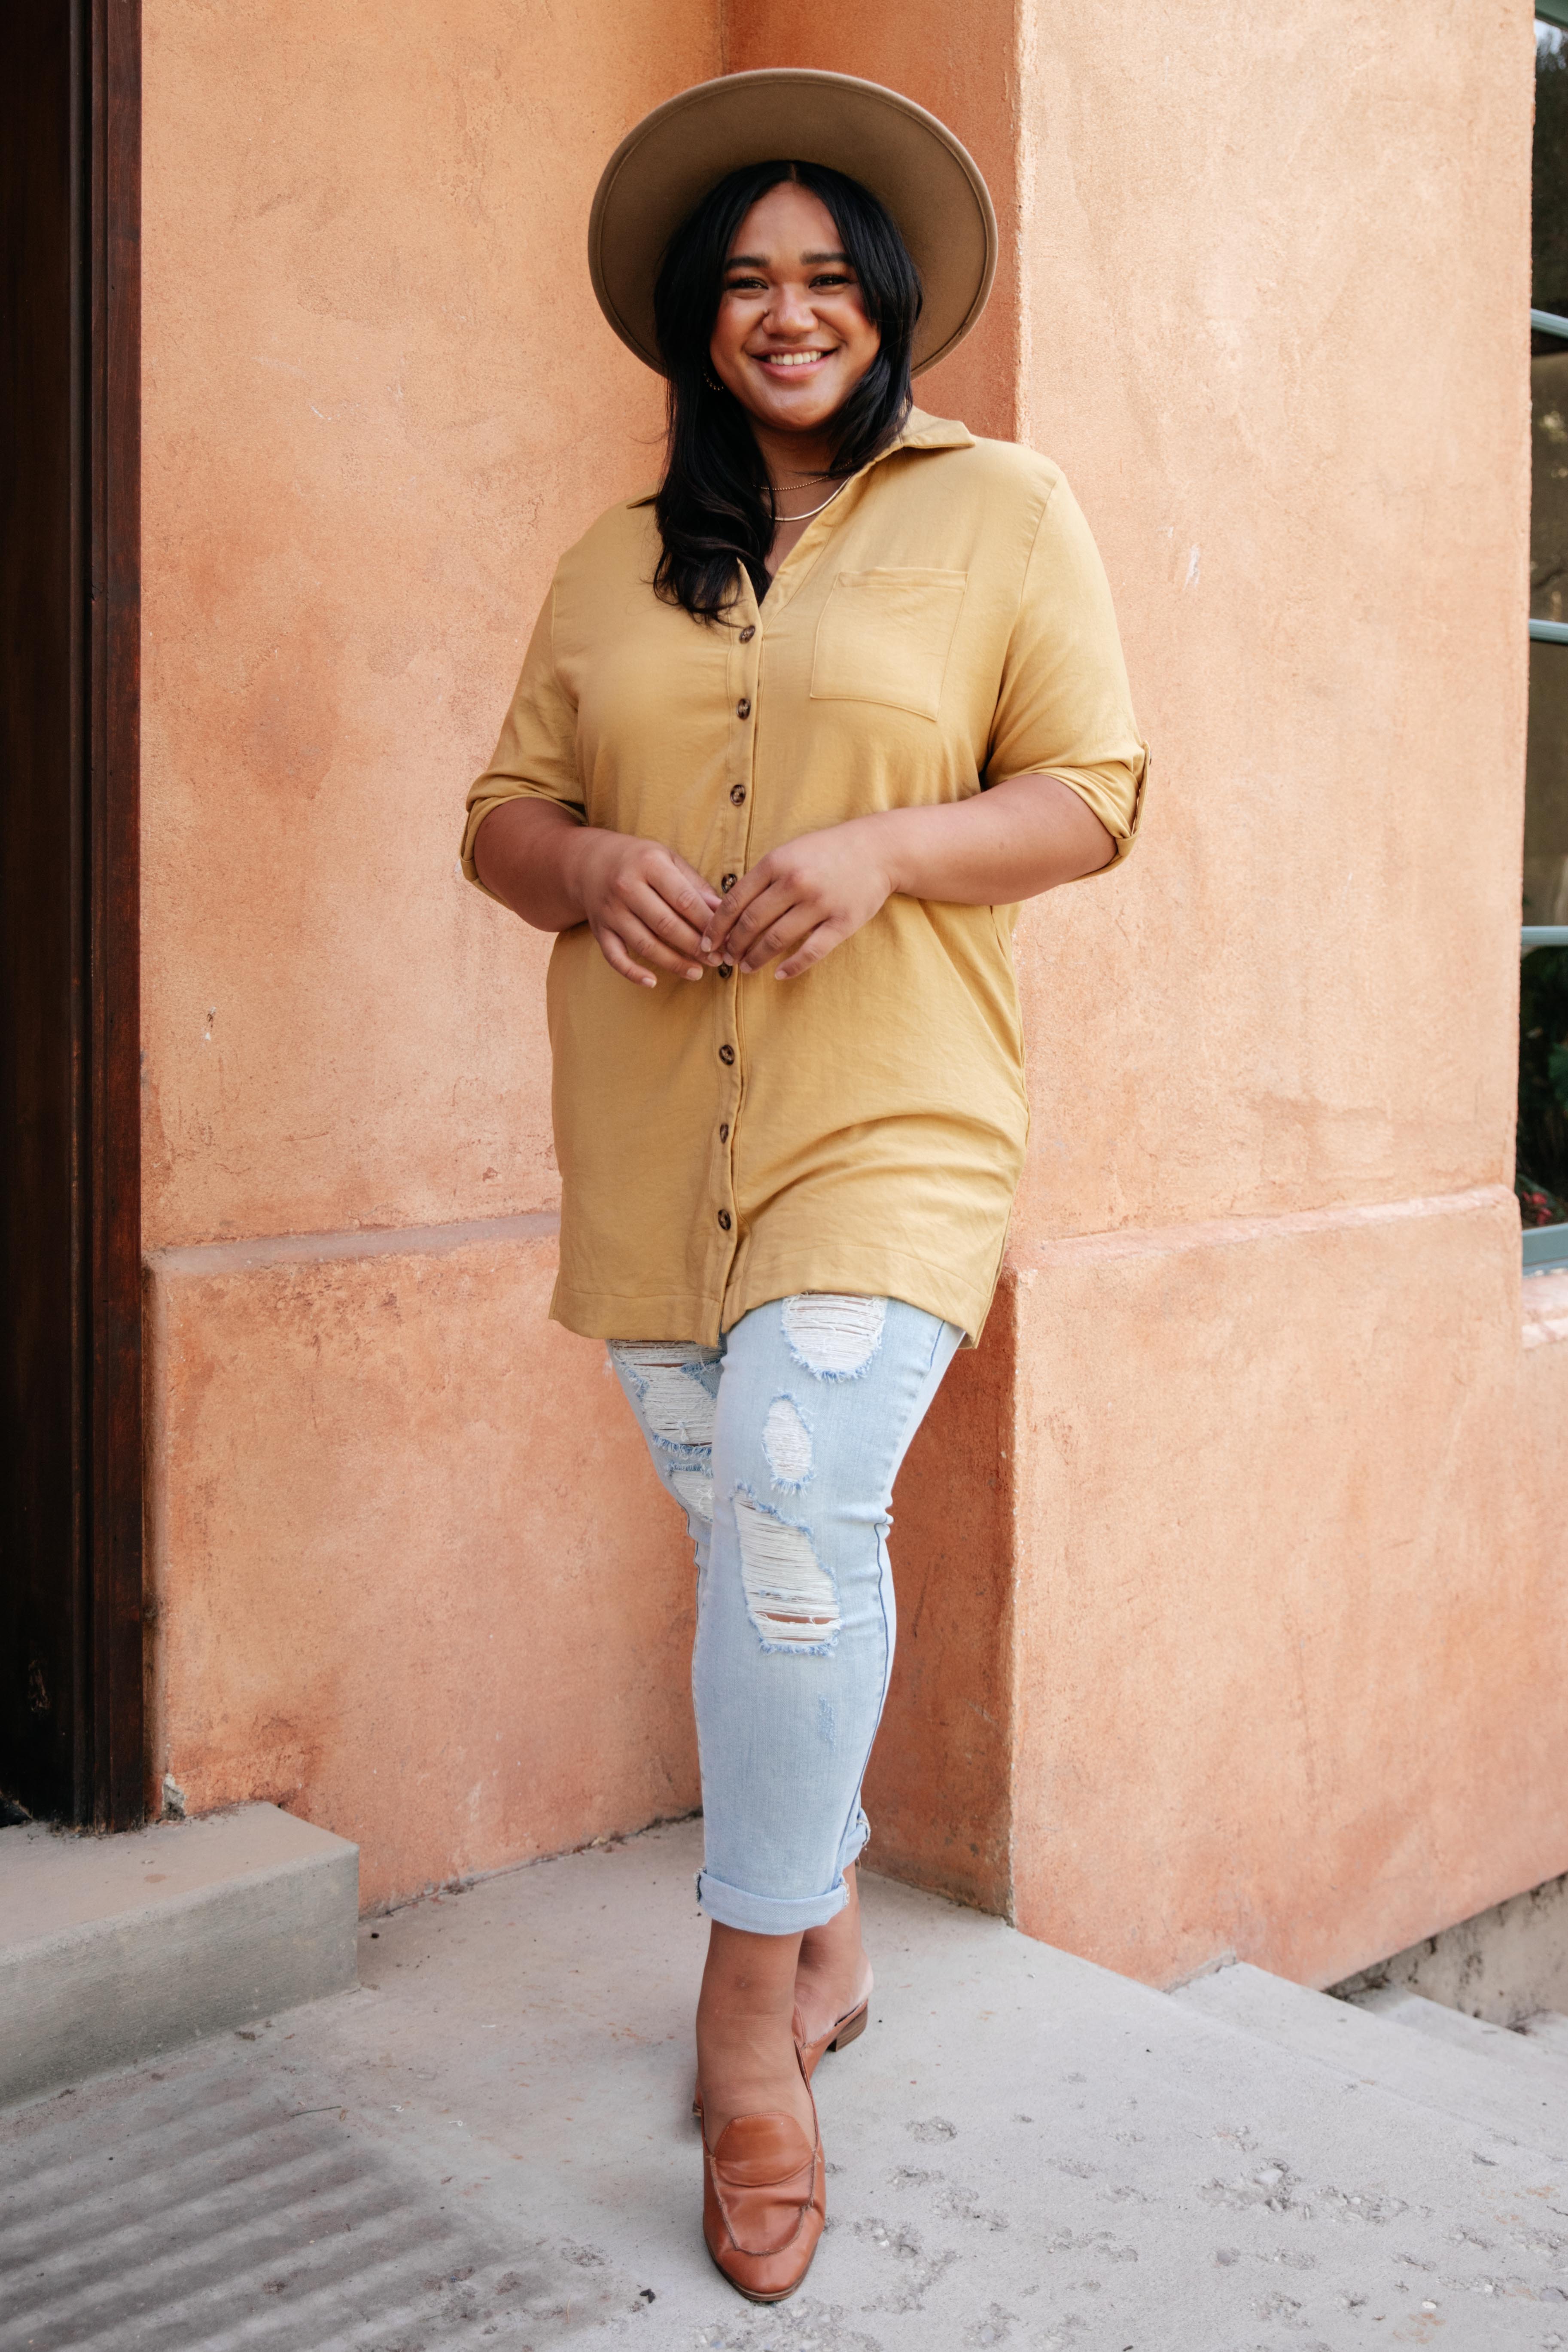 Button Up Day Tunic